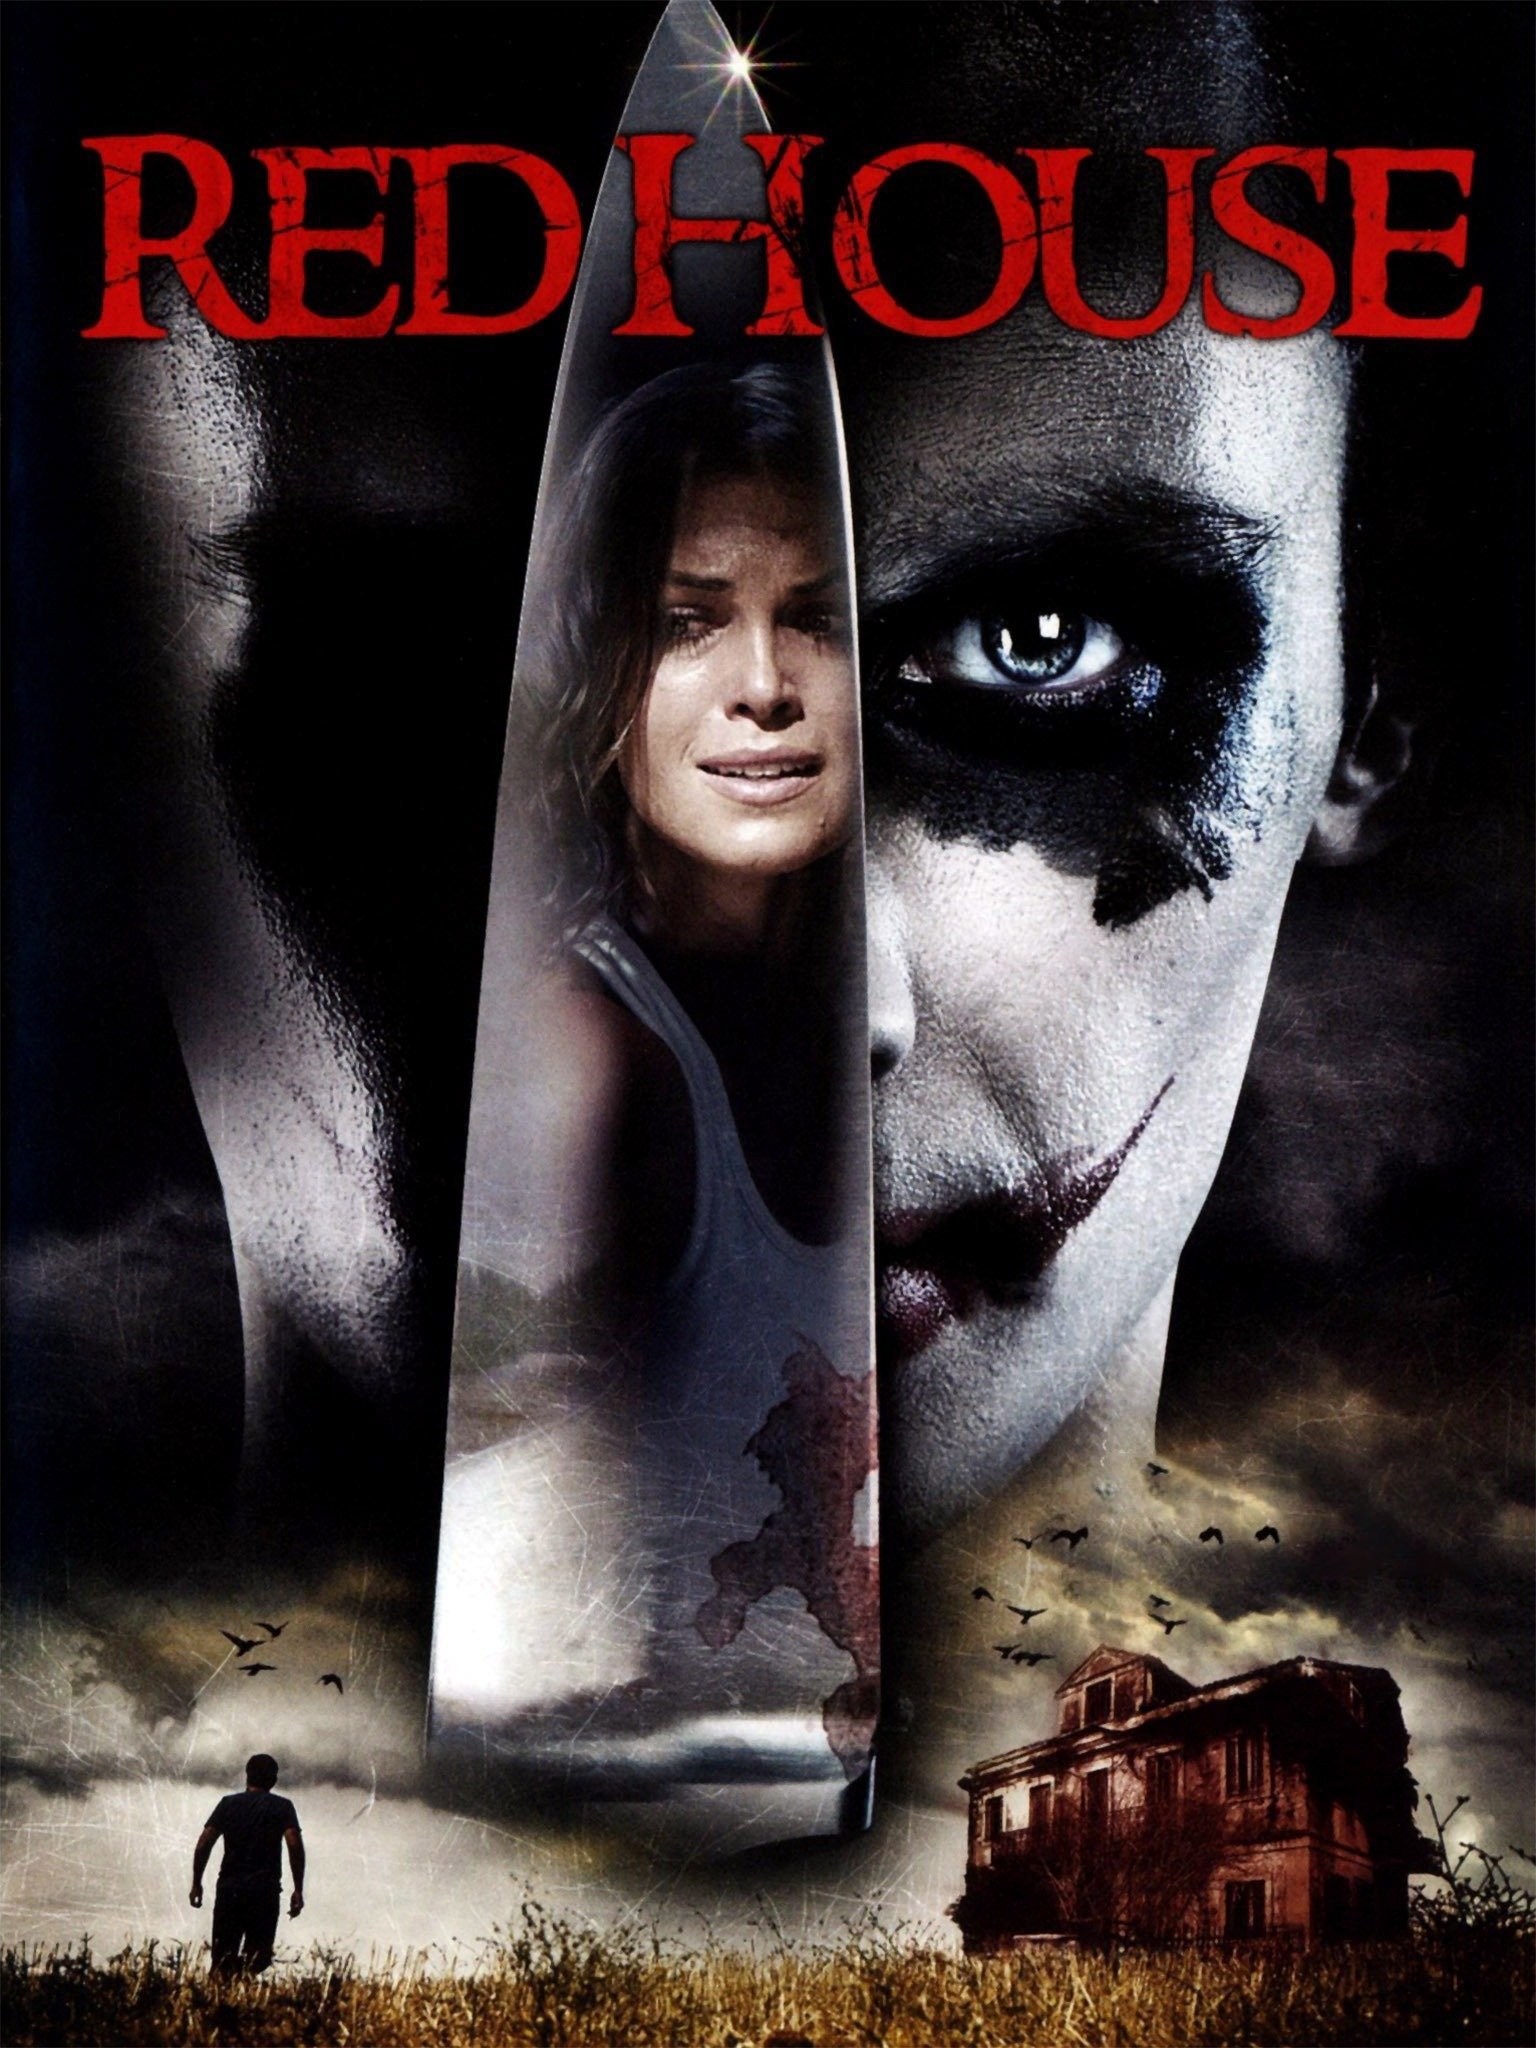 house red movie review